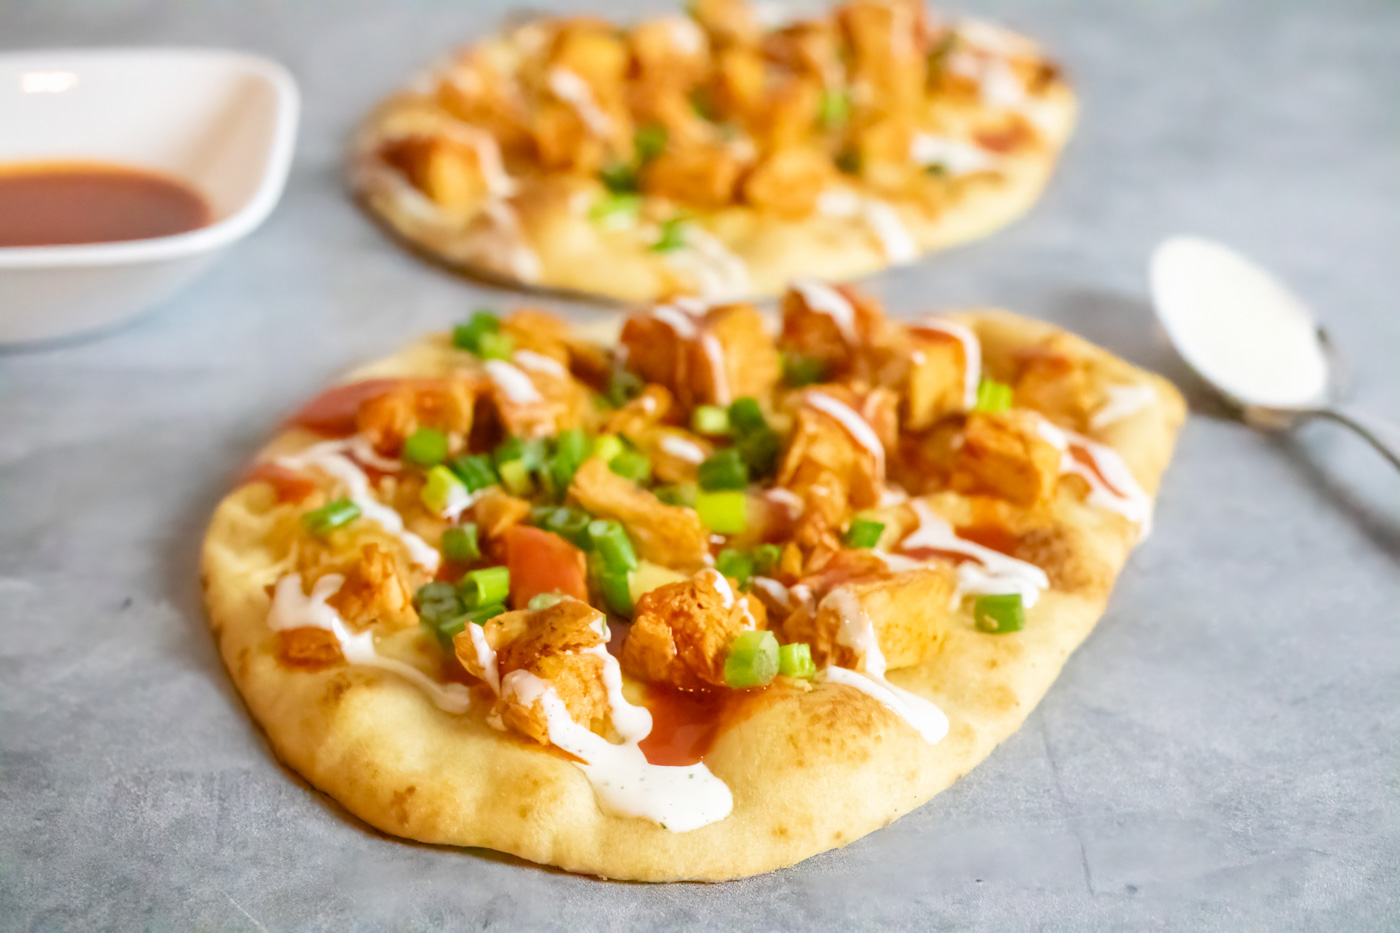 Two buffalo chicken flatbread pizzas, a bowl of buffalo sauce, and a spoon coated in ranch dressing